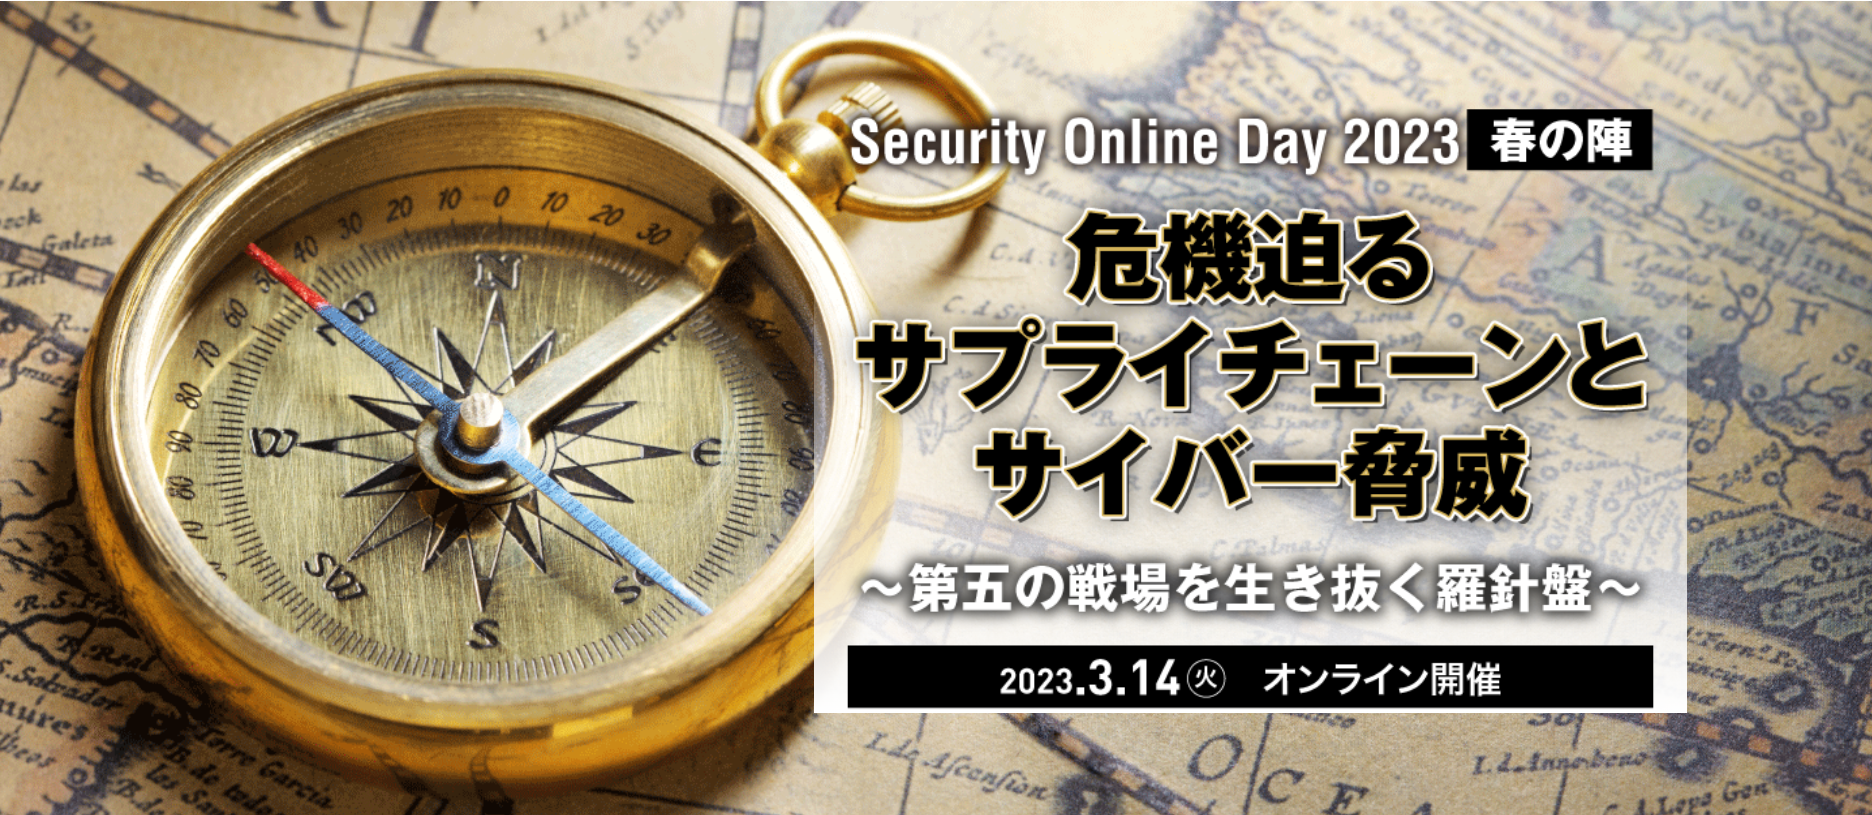 Security Online Day 2023春の陣